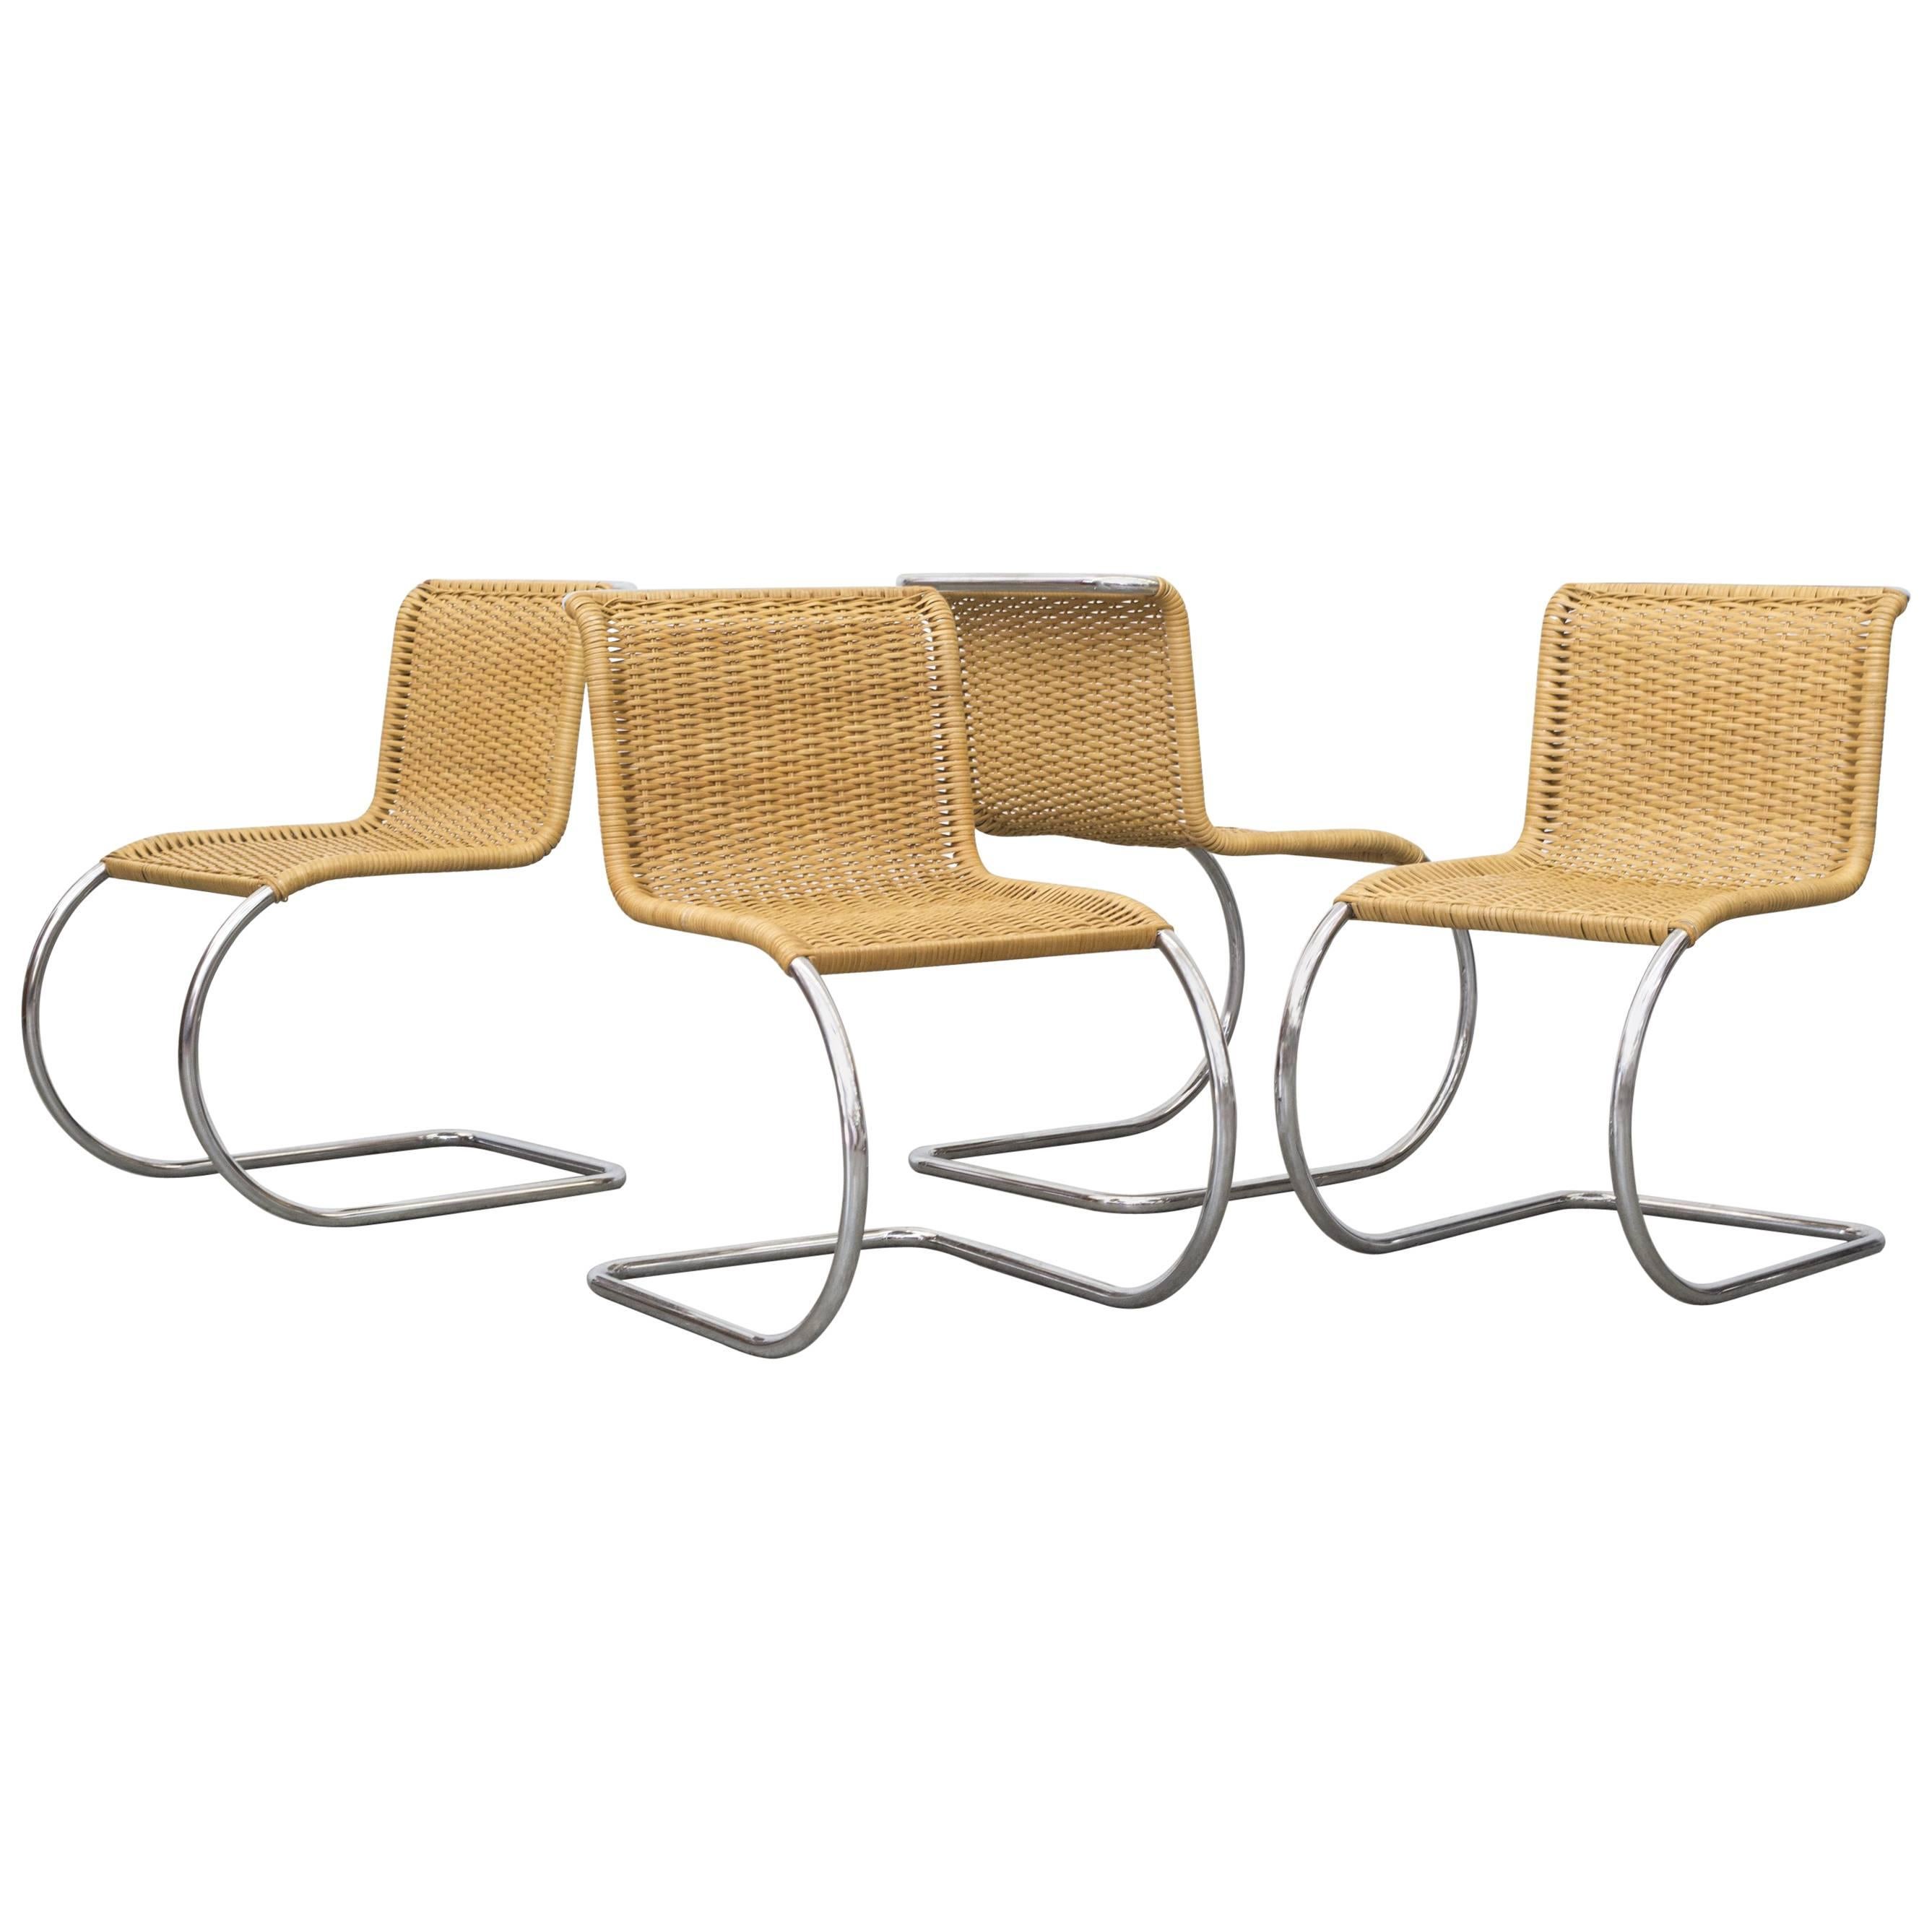 Mies van der Rohe MR10 Wicker and Chrome Chairs